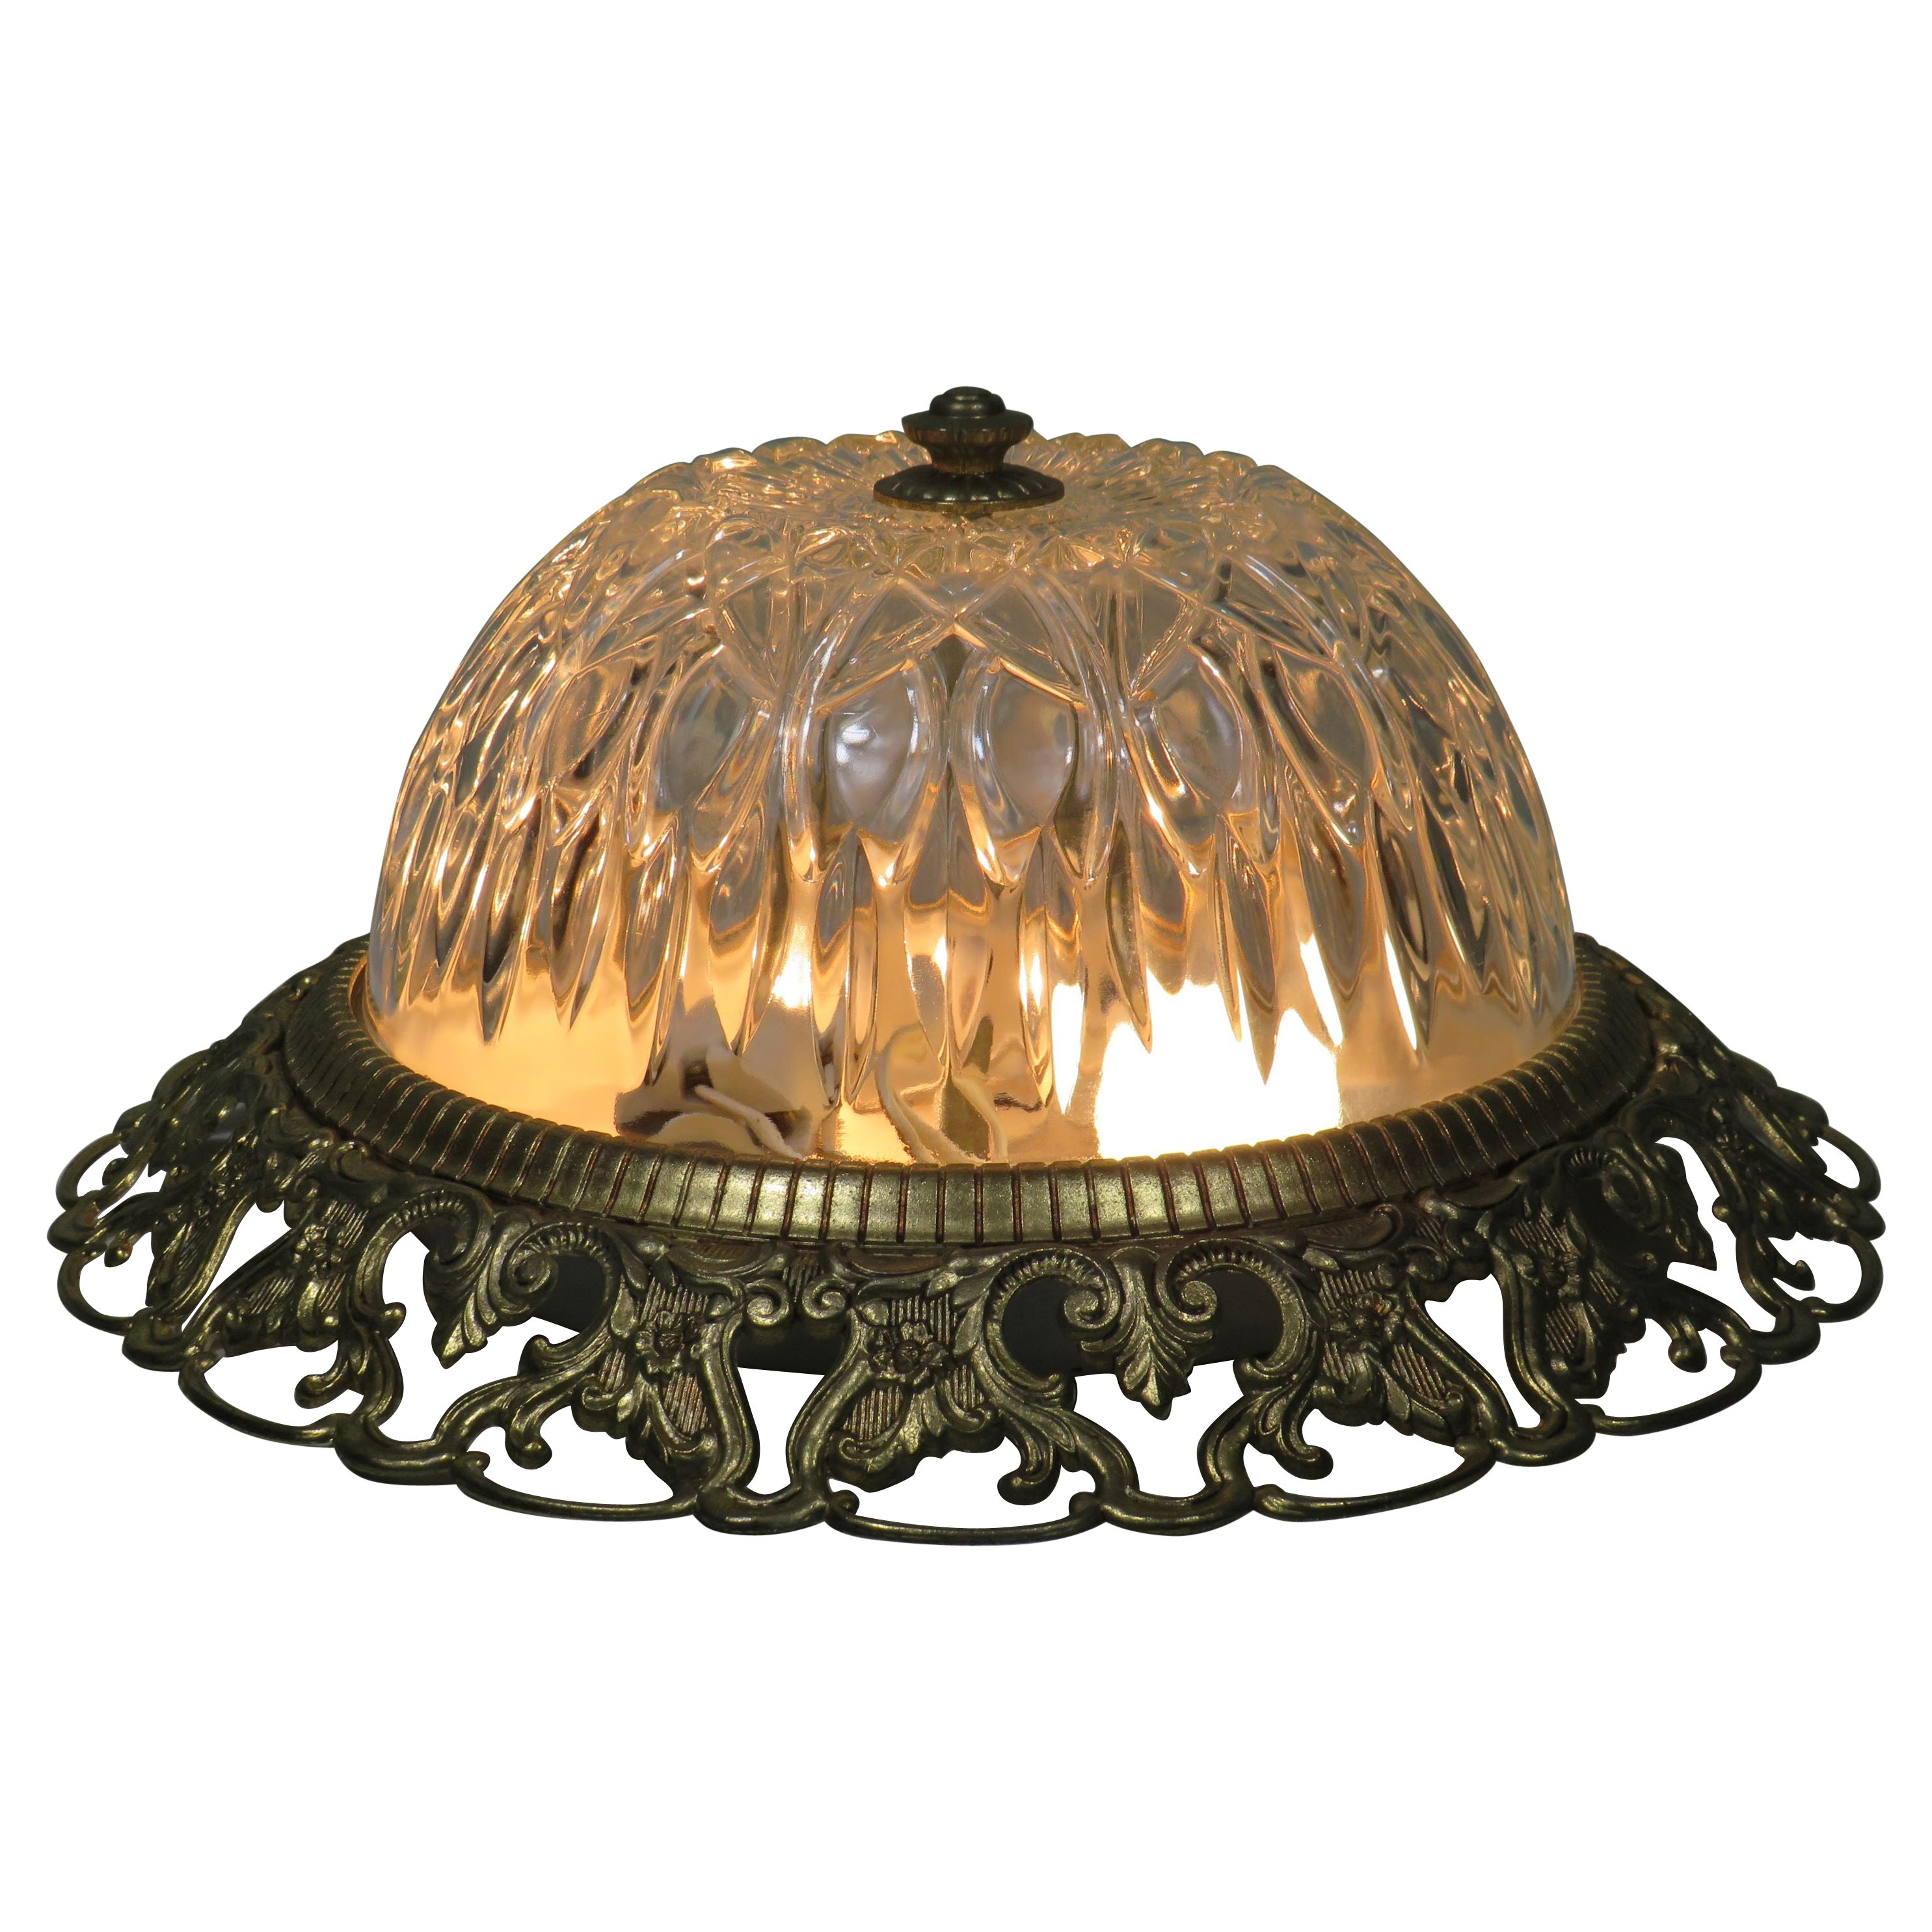 Hollywood Regency ceiling lamp, cut glass and openwork gilded edge. For Sale